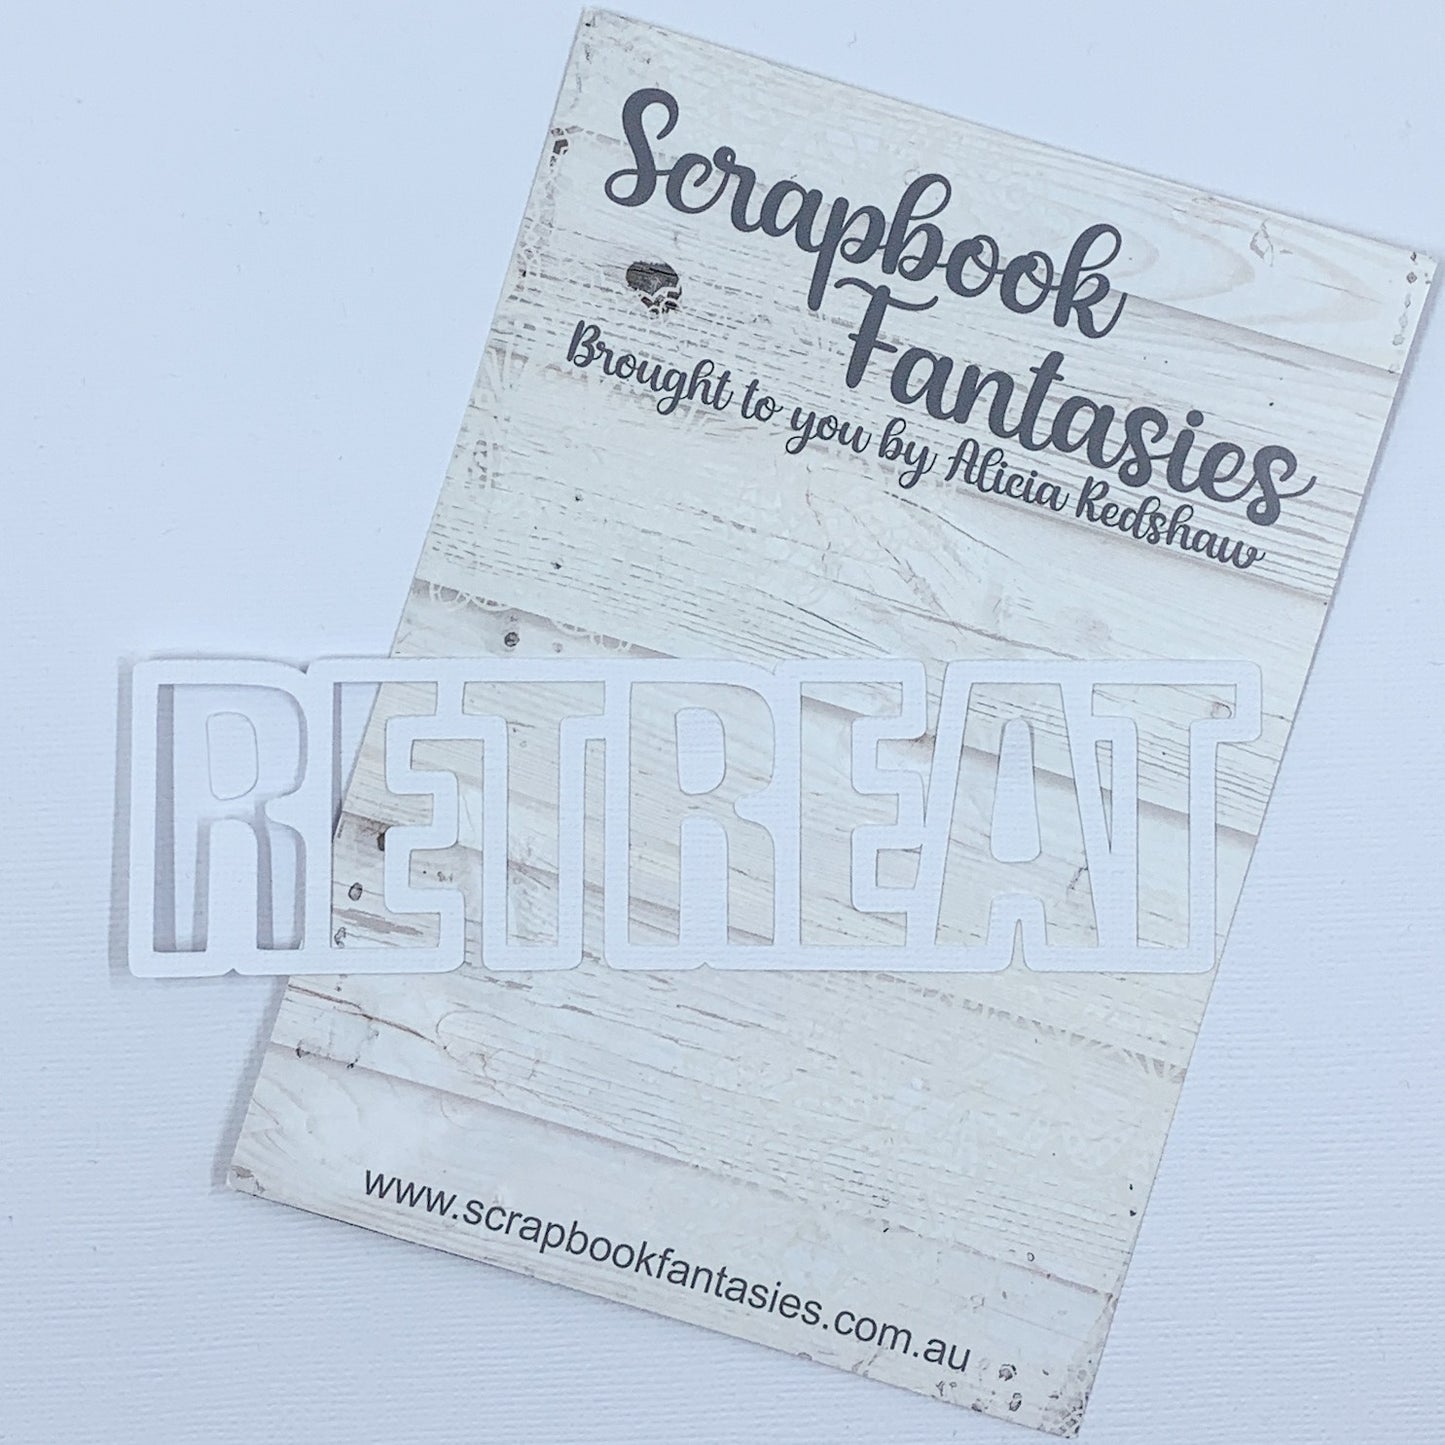 Retreat (open) 1.75"x5.75" White Linen Cardstock Title-Cut - Designed by Alicia Redshaw